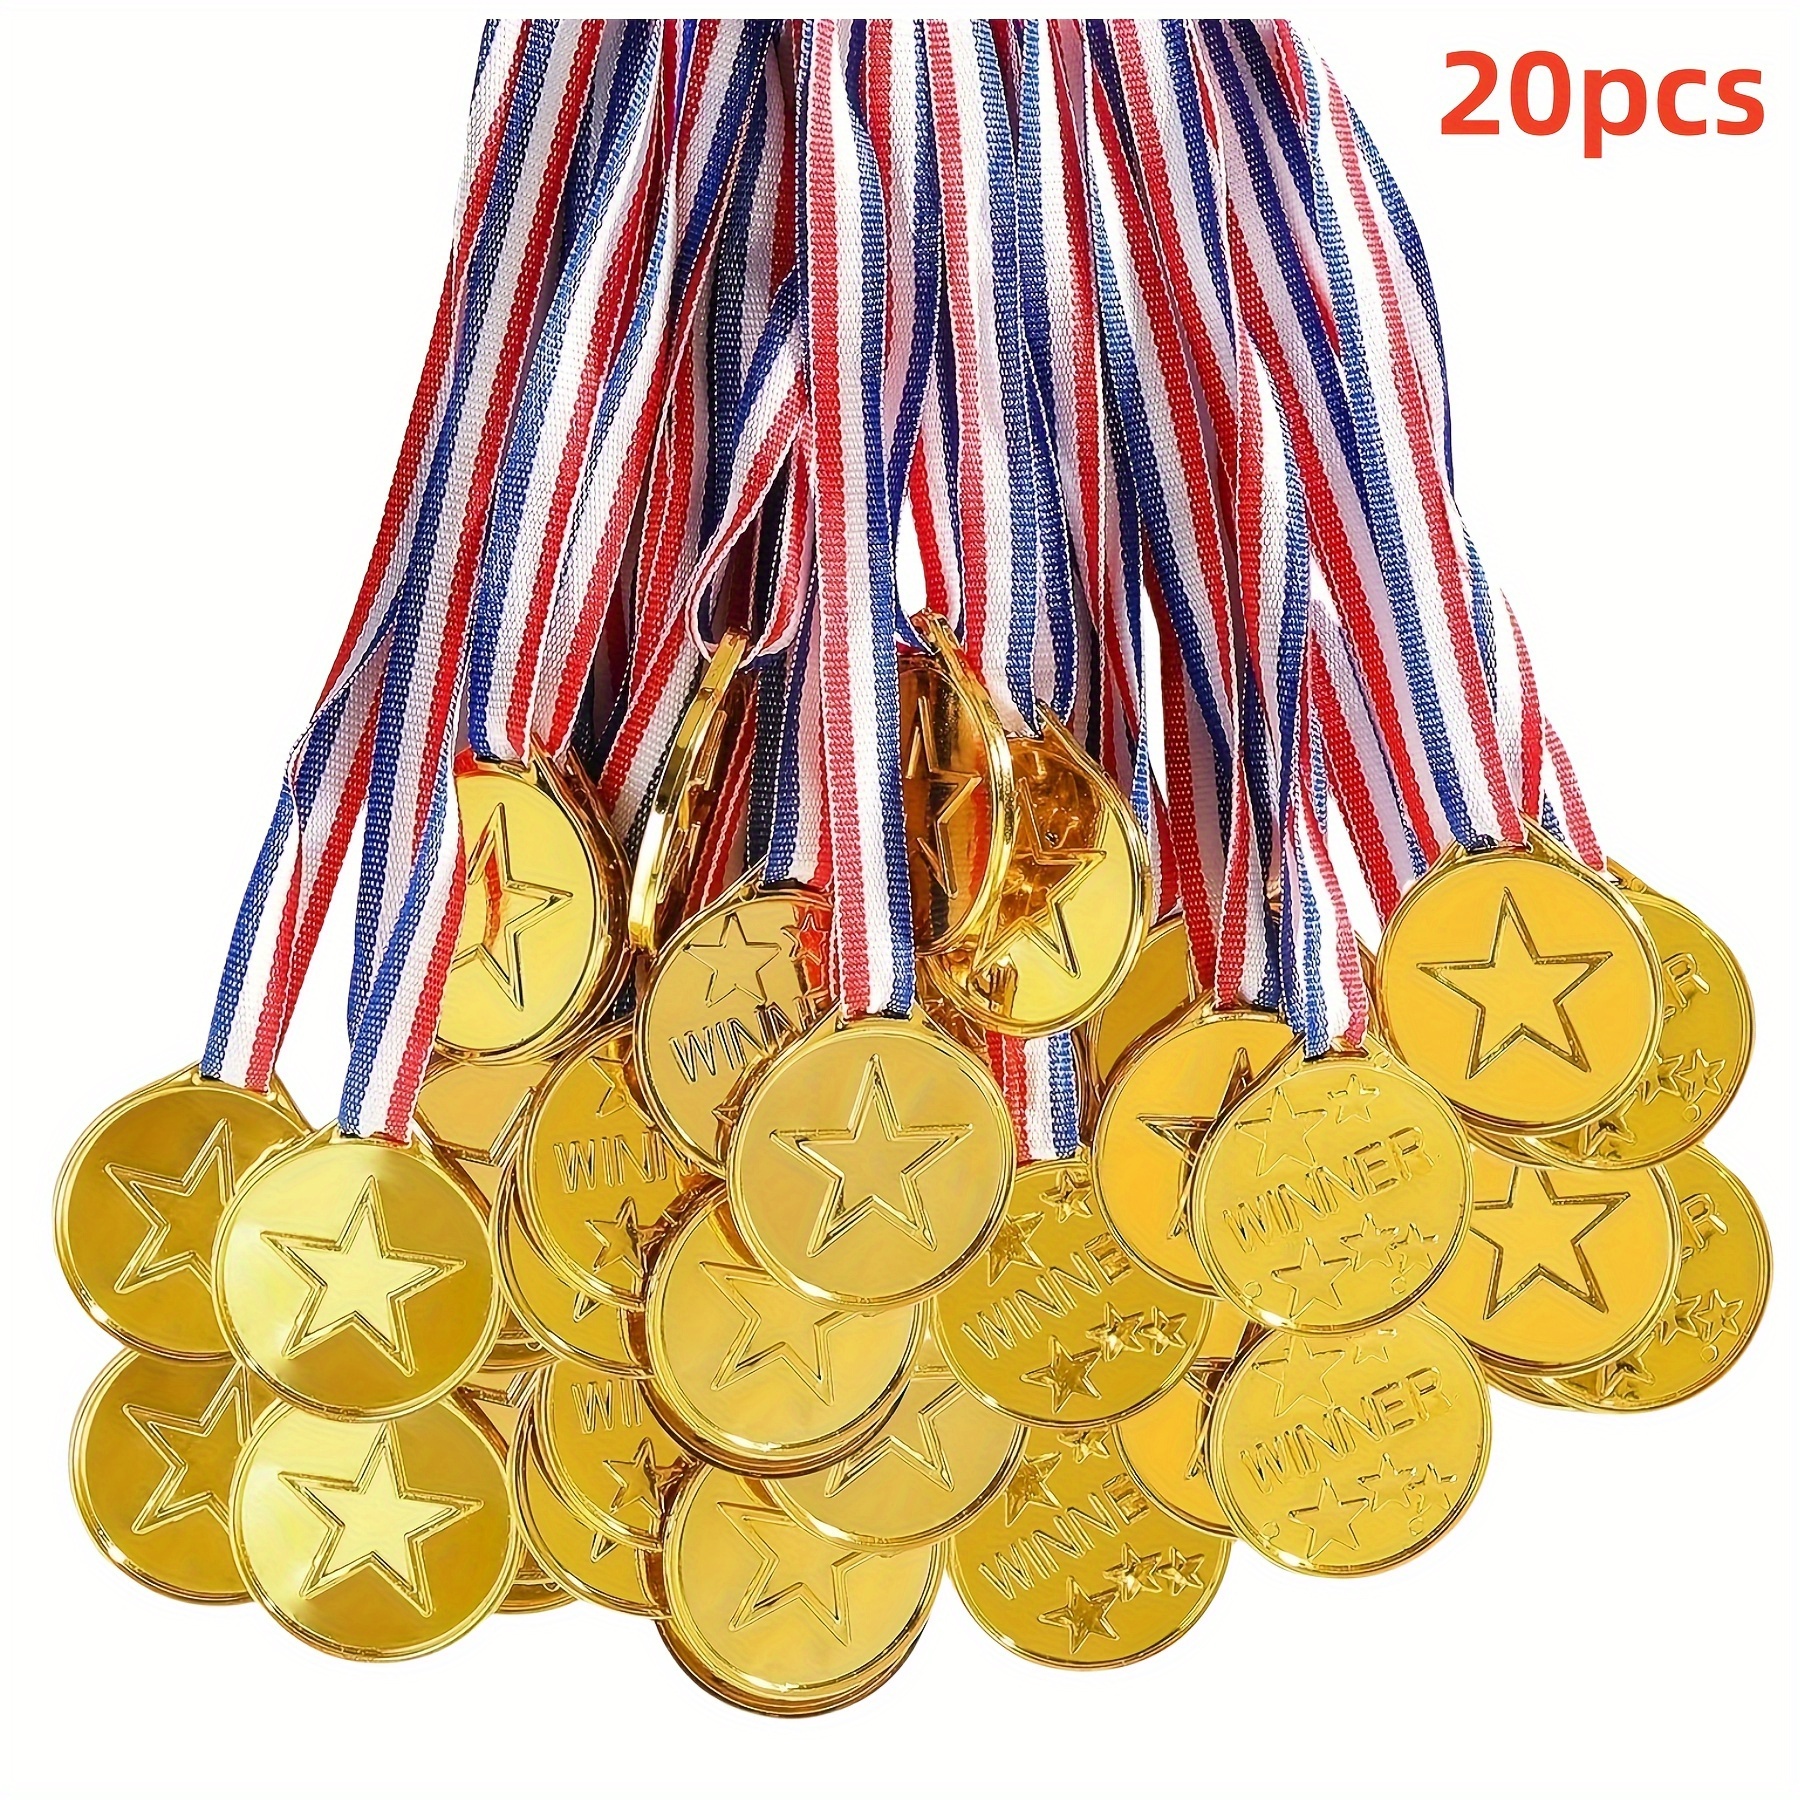 

20pcs Plastic Winner Award Medals For Sports, Games Competitions, Party Favors And Decorations